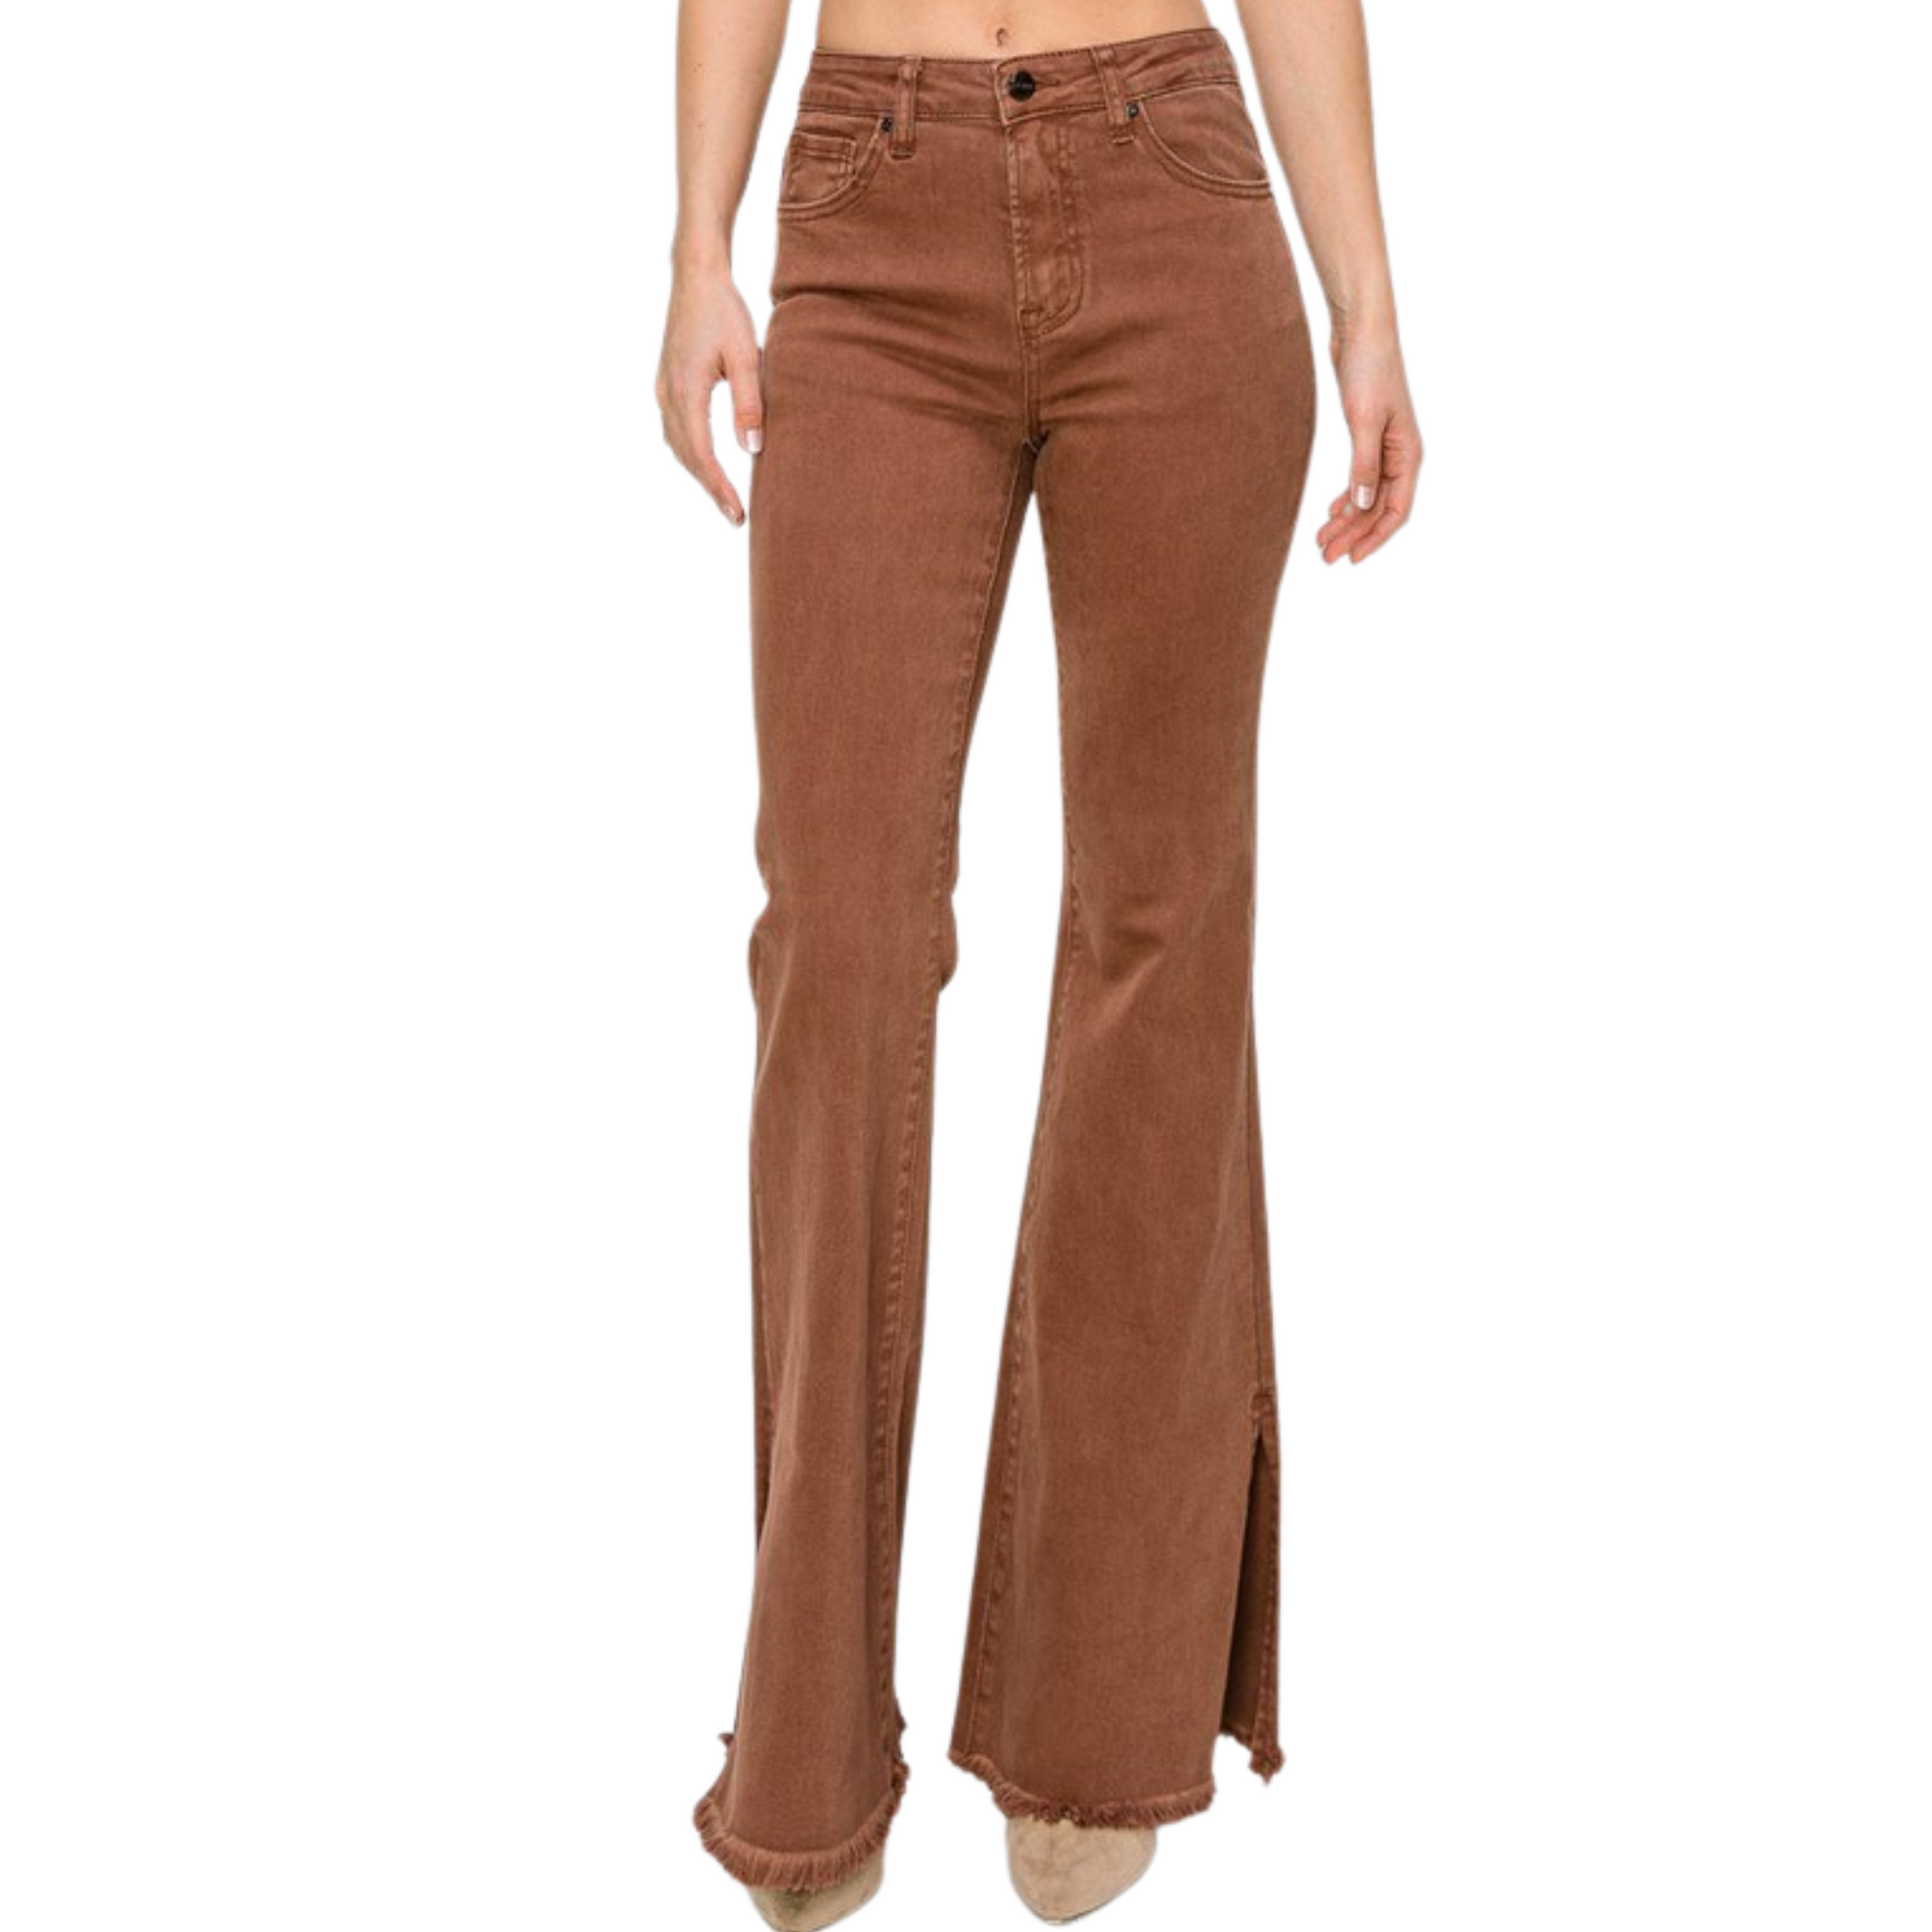 "These High Rise Side Split Flares by Risen offer a sophisticated look in an espresso color. The side slit adds stylish detail while the flare cut elongates and flatters the legs. Expertly crafted for a high-quality finish, perfect for any occasion."